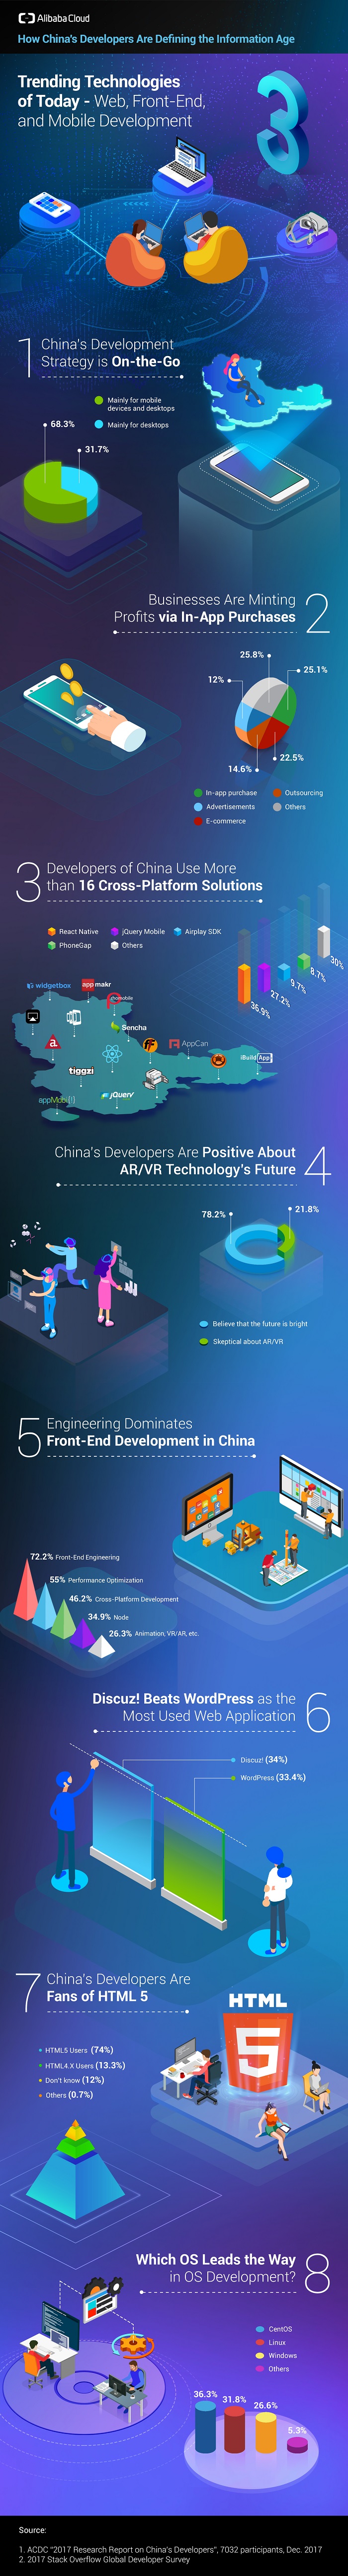 How_China_s_Developers_are_Defining_the_Information_Age_V3